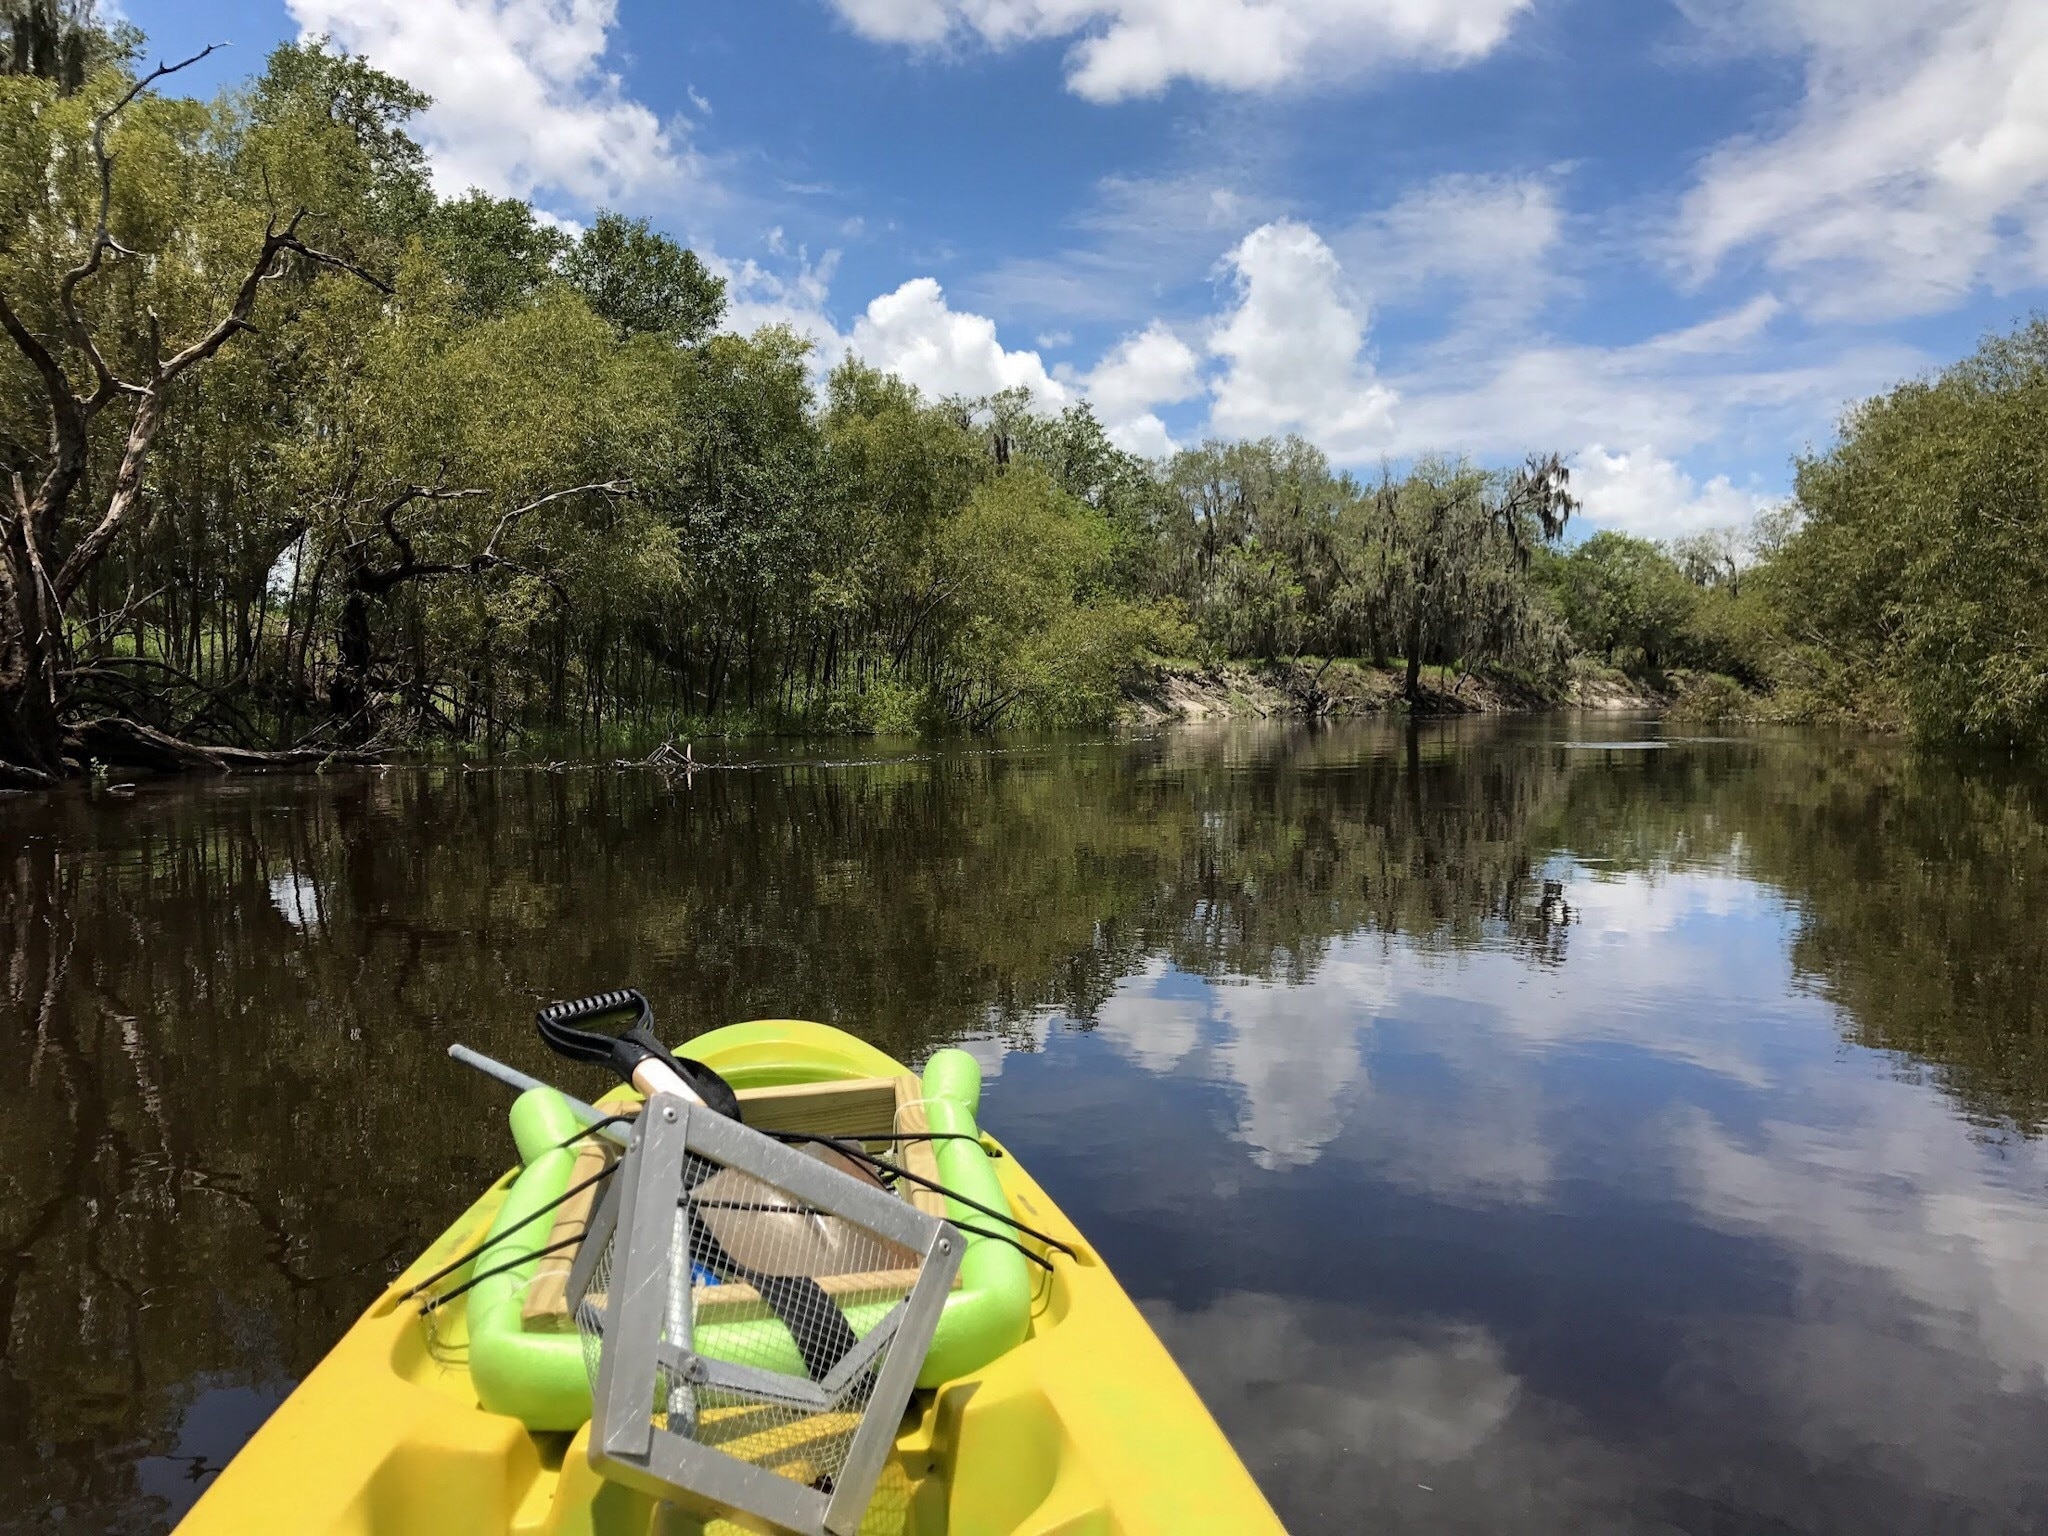 It might not be fast-paced, but floating down the Peace River in Florida to dive and hunt for fossils and Megalodon teeth in gator-infested waters can definitely be a thrill ride. #adventure #peace #river #fossils #megalodon #shark #nature #iceage